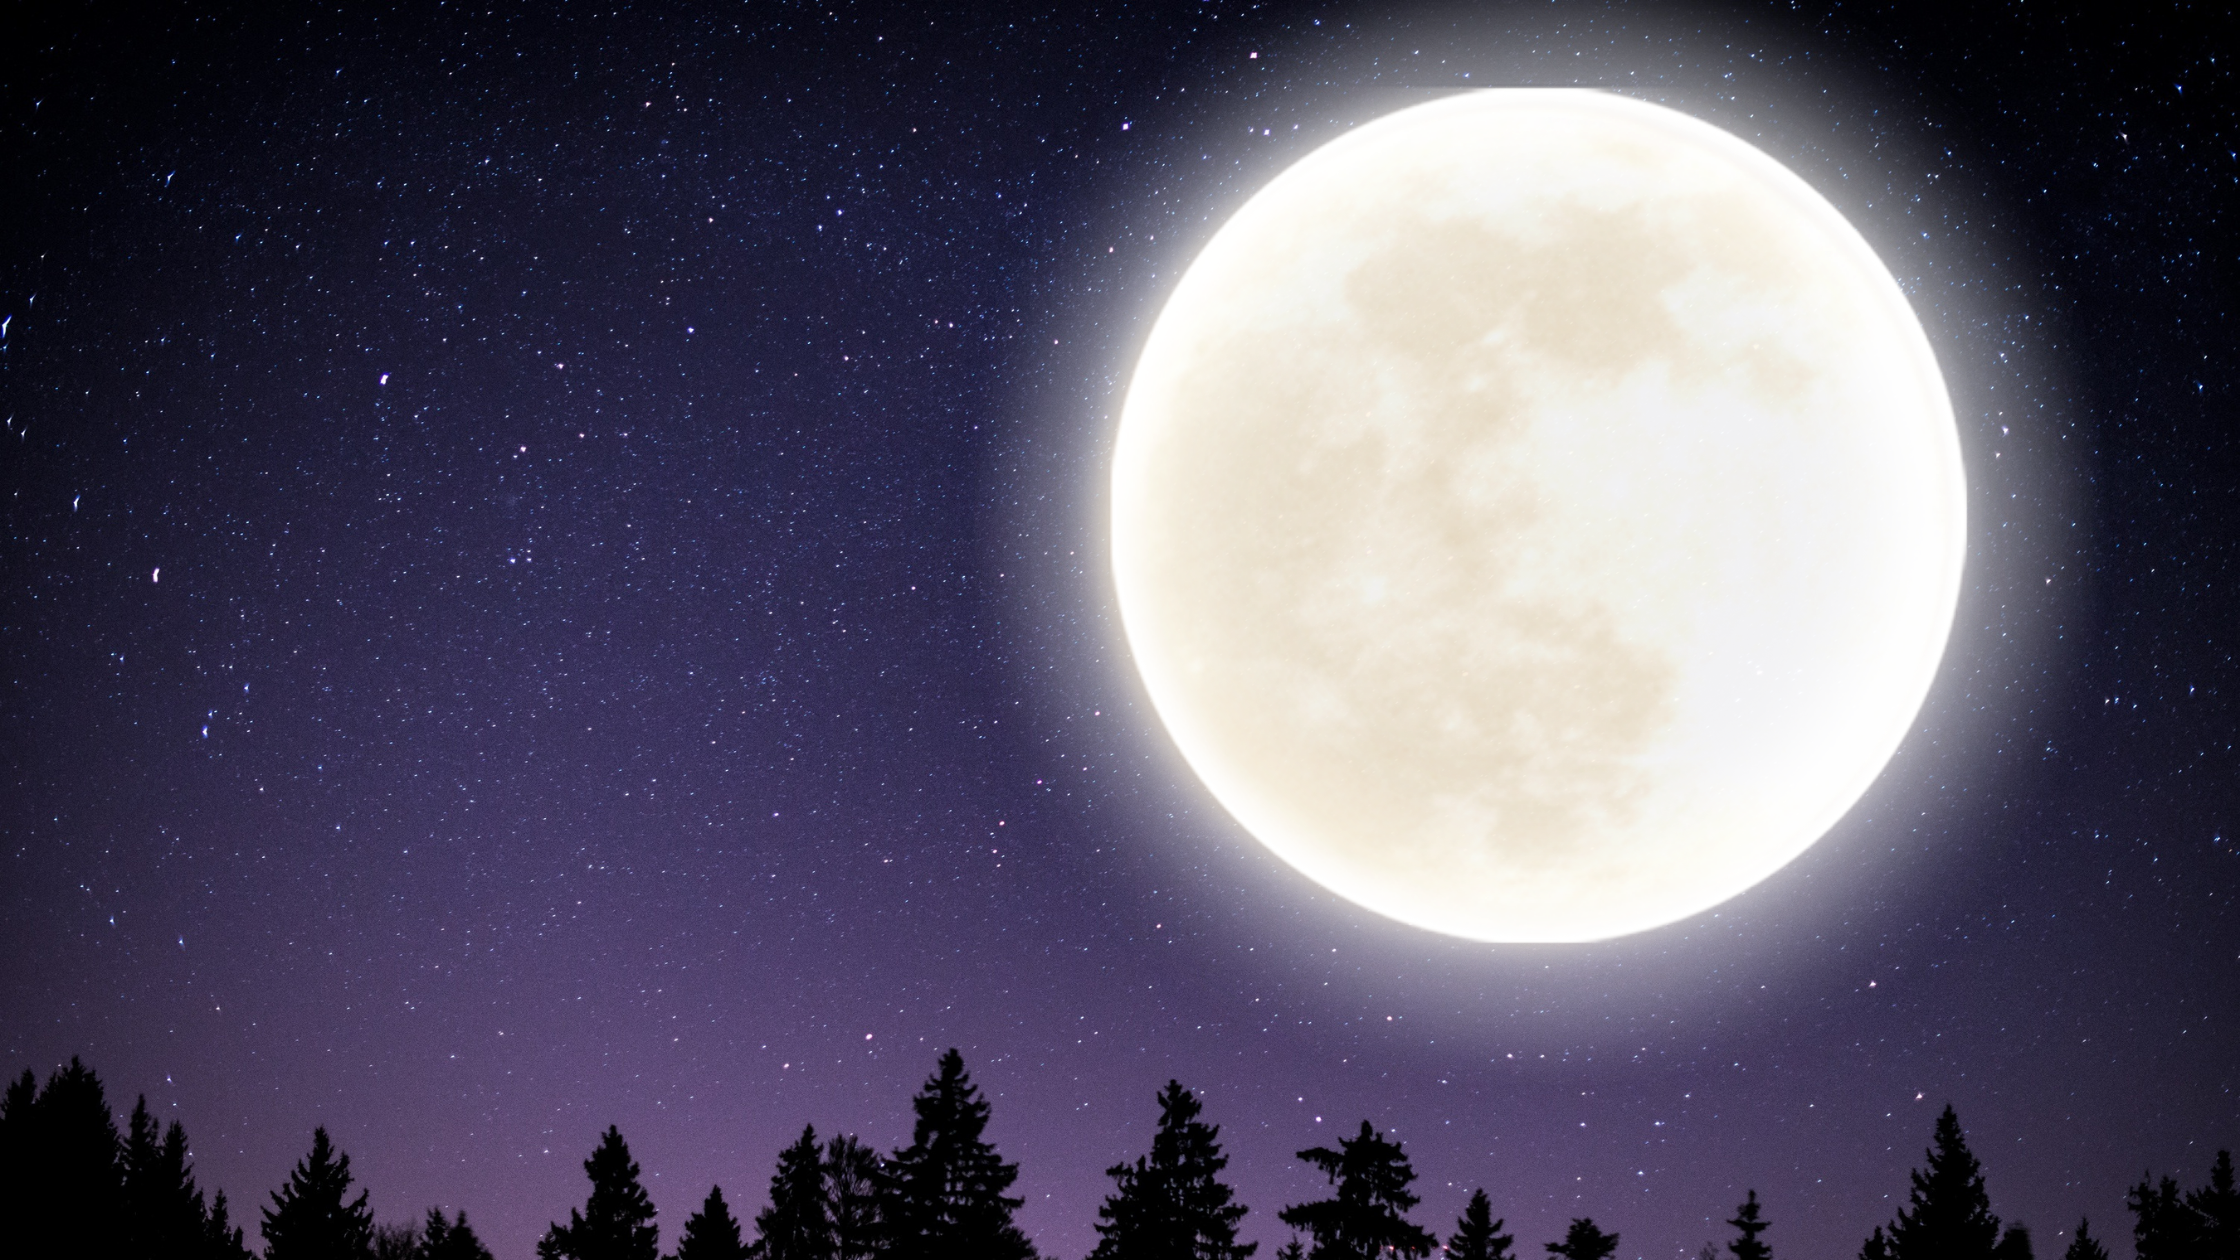 Does The Full Moon Affect My Period?